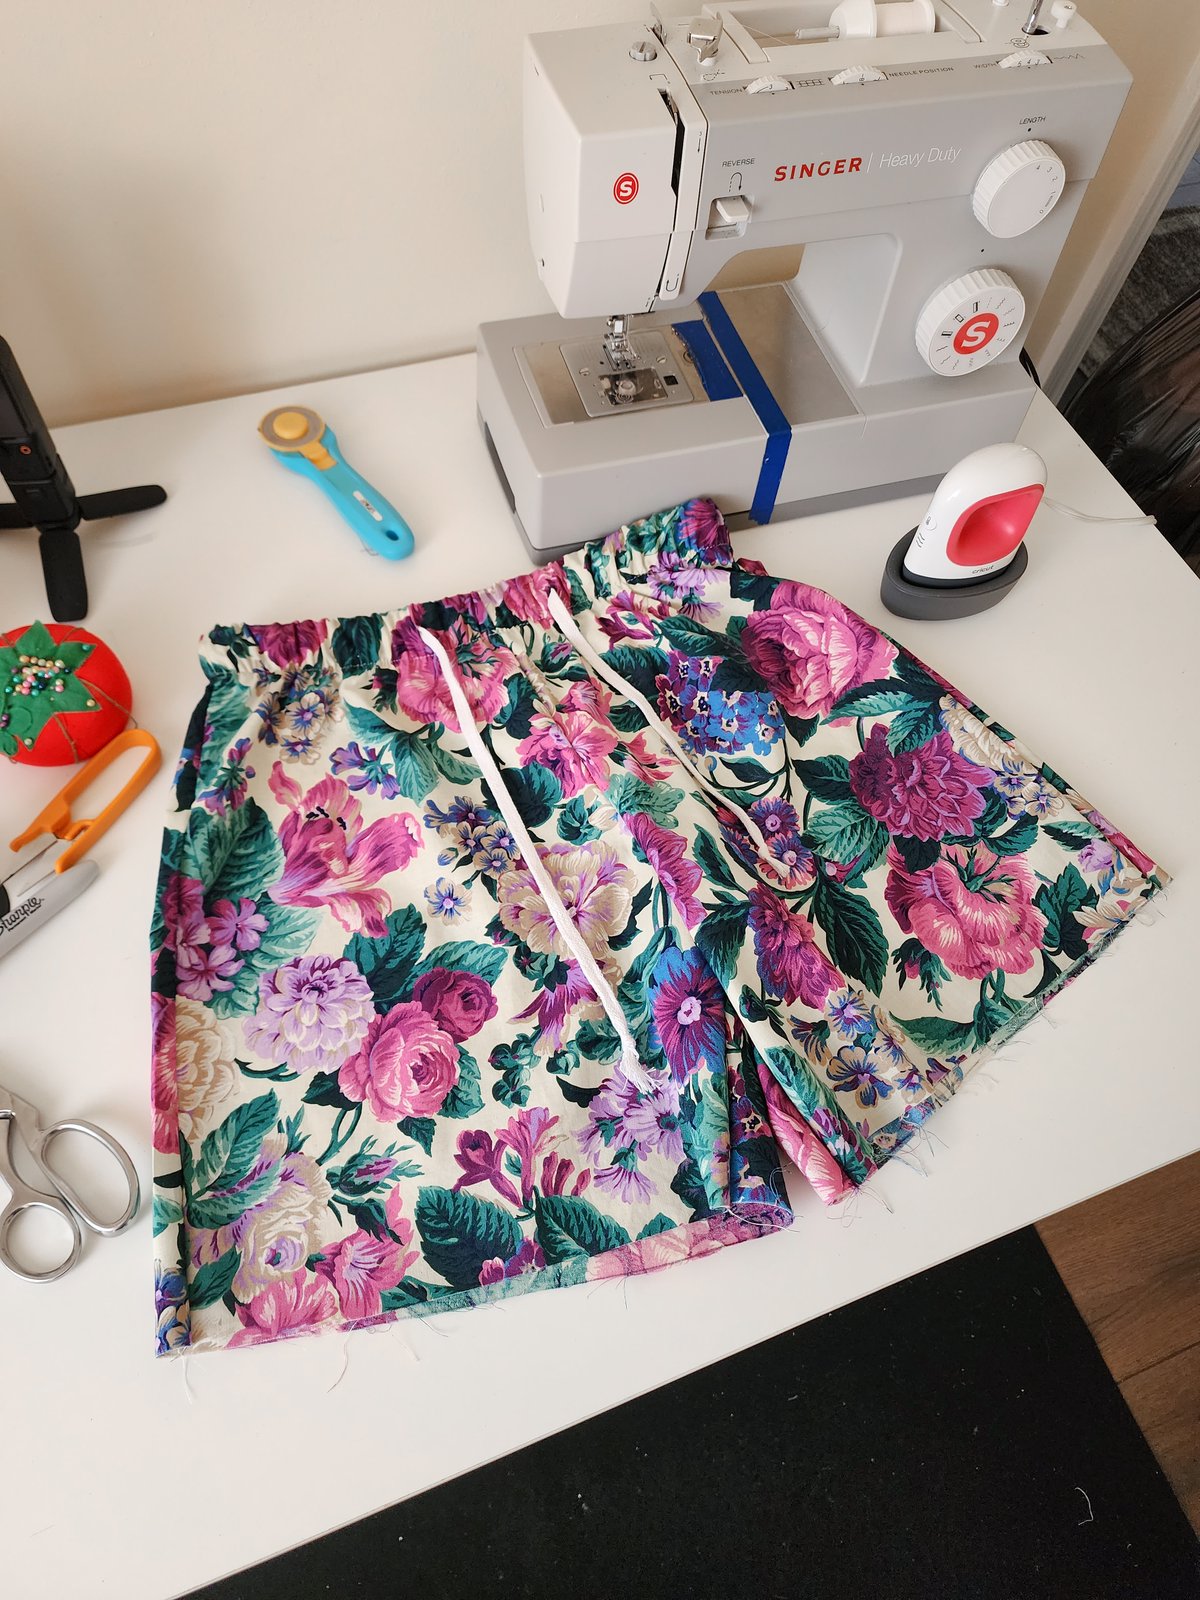 Image of 1 of 2 Vintage floral cotton shorts 